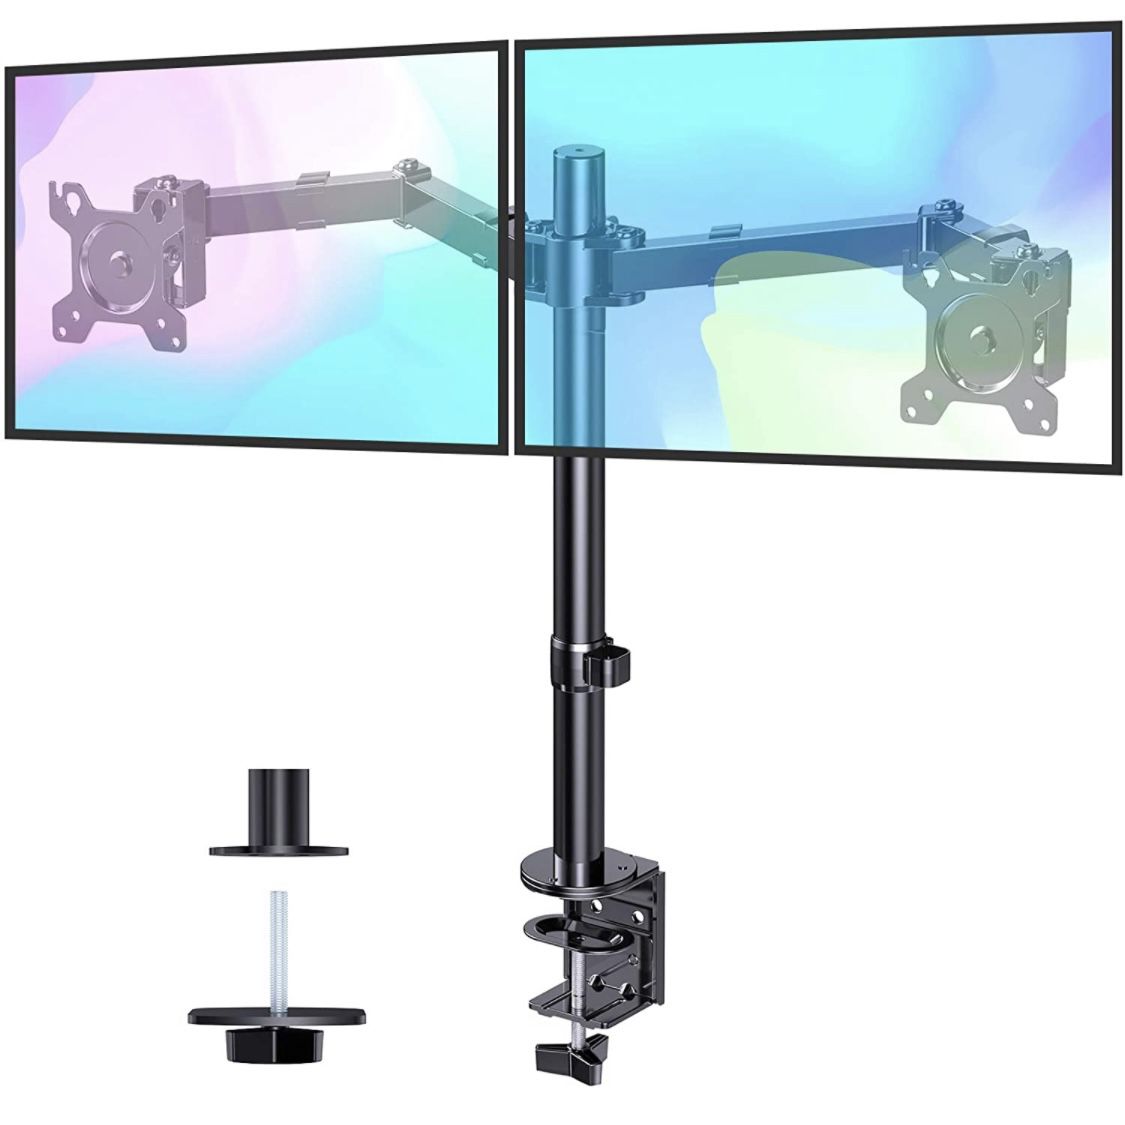 new-Dual Monitor Stand Desk Mount - Heavy Duty  Fits Screens Up to 32" -Holds Up to 26.4 lbs Per Arm